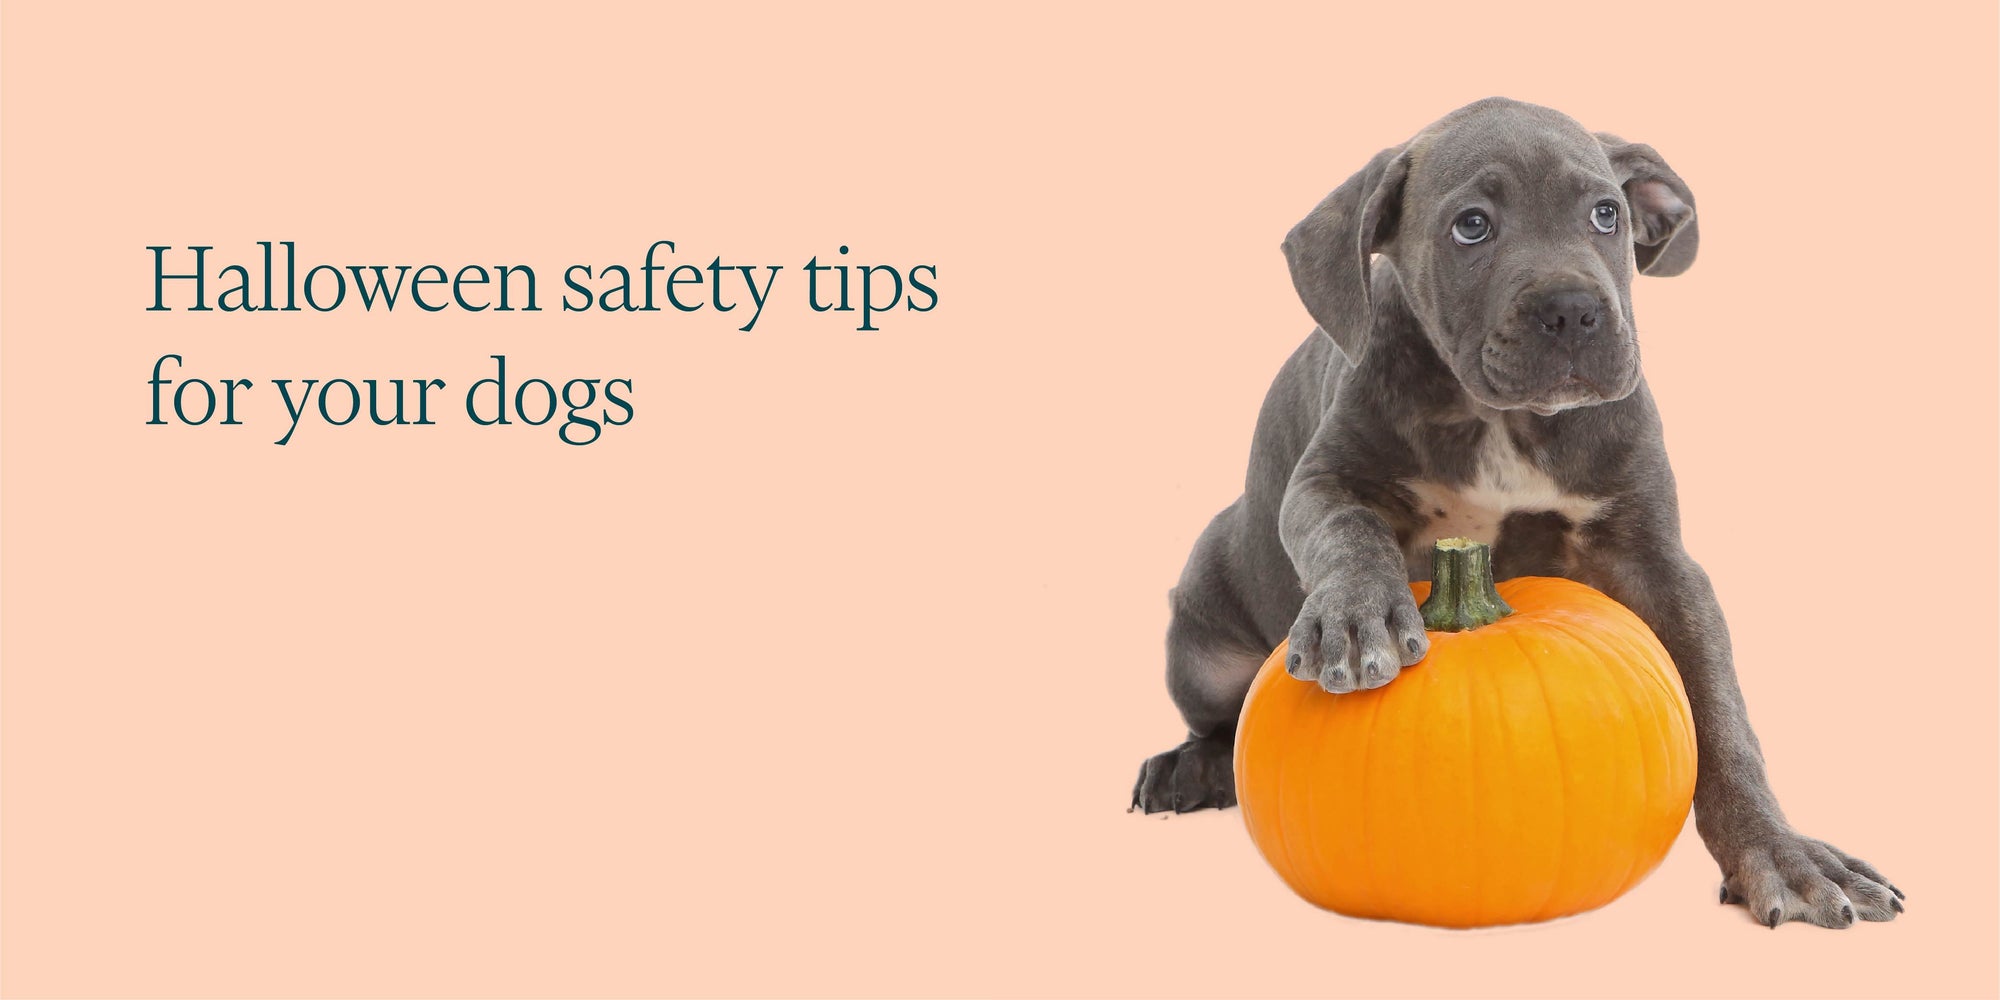 5 Halloween Safety Tips for Pets - Whistle